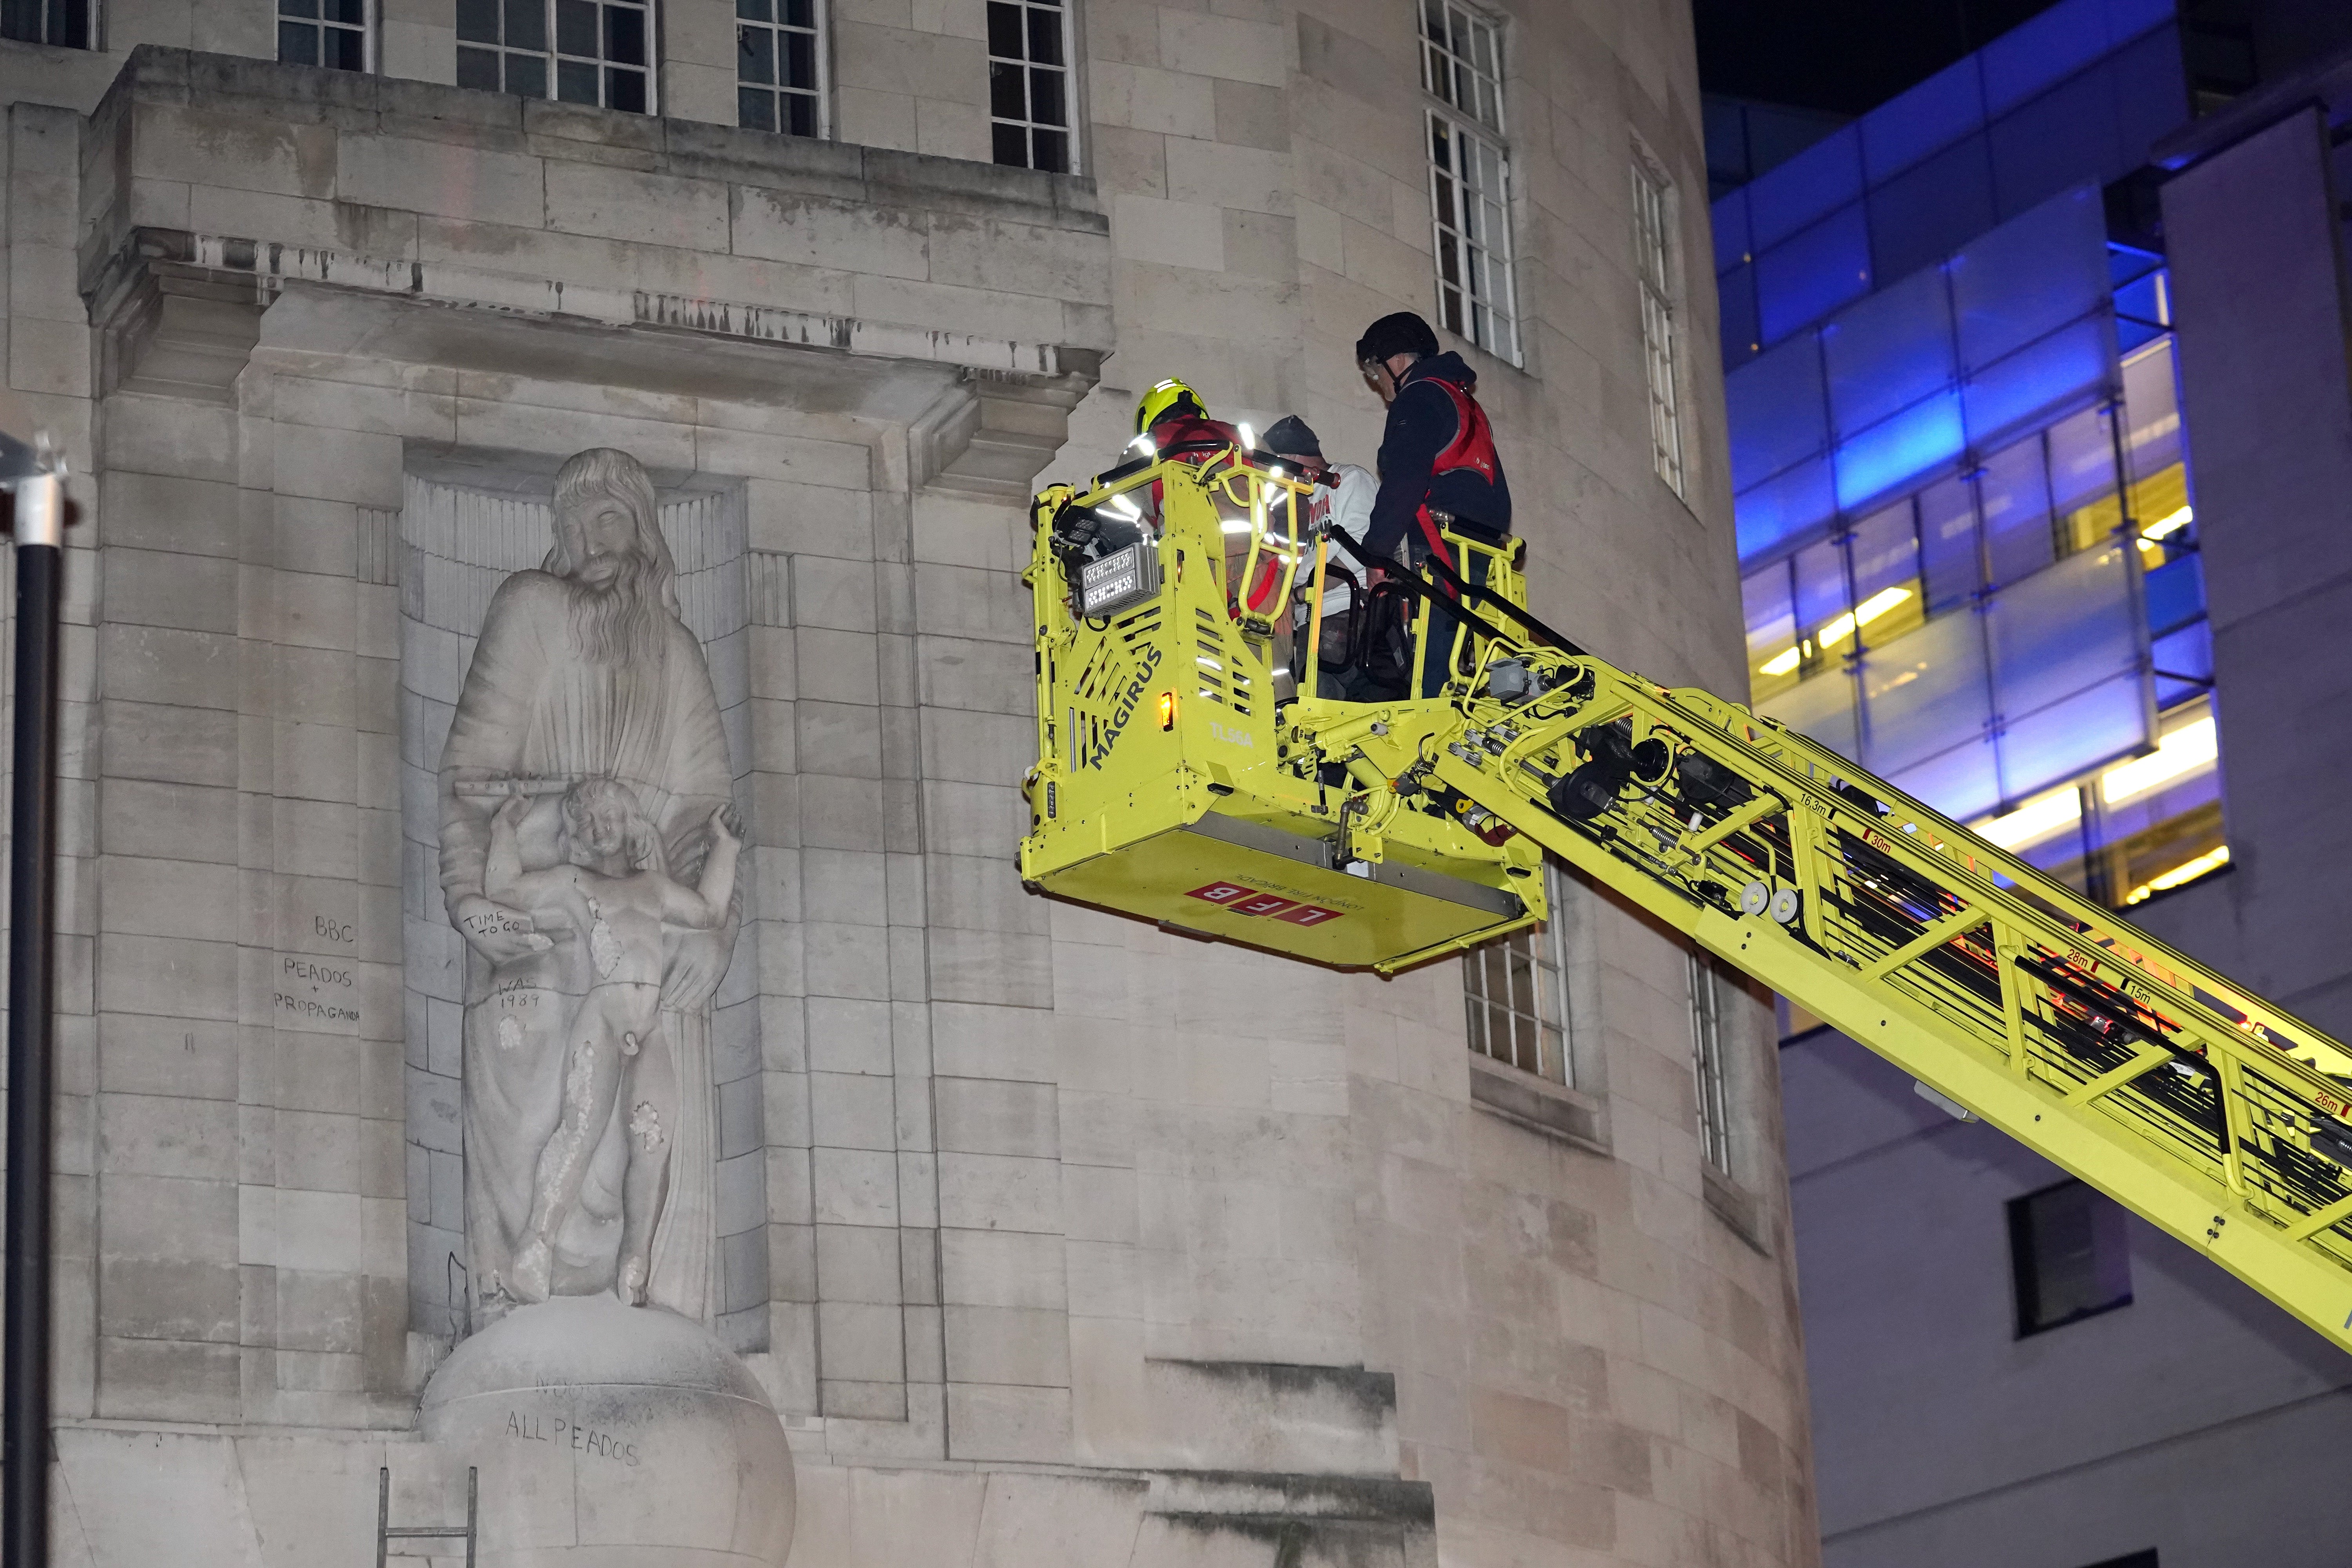 A cherry picker is seen being used during the incident on Wednesday evening (Ian West/PA)